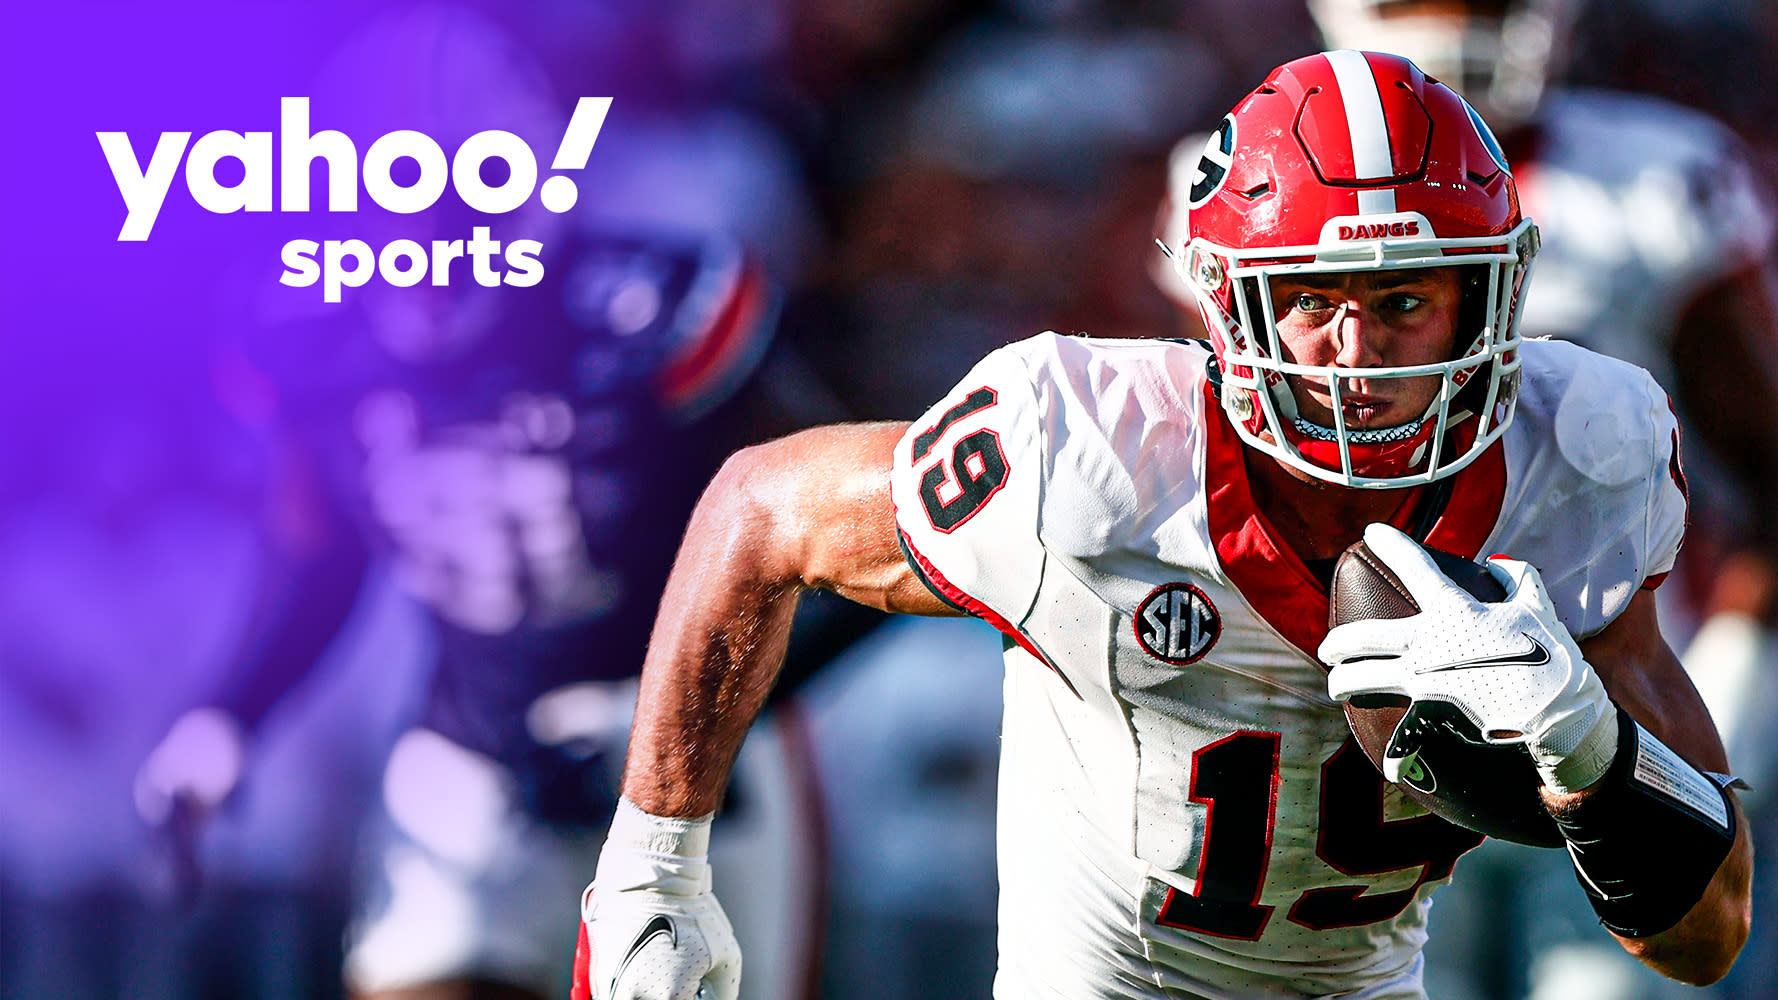 Yahoo Top 10: How much will Saturday of close calls shake things up?